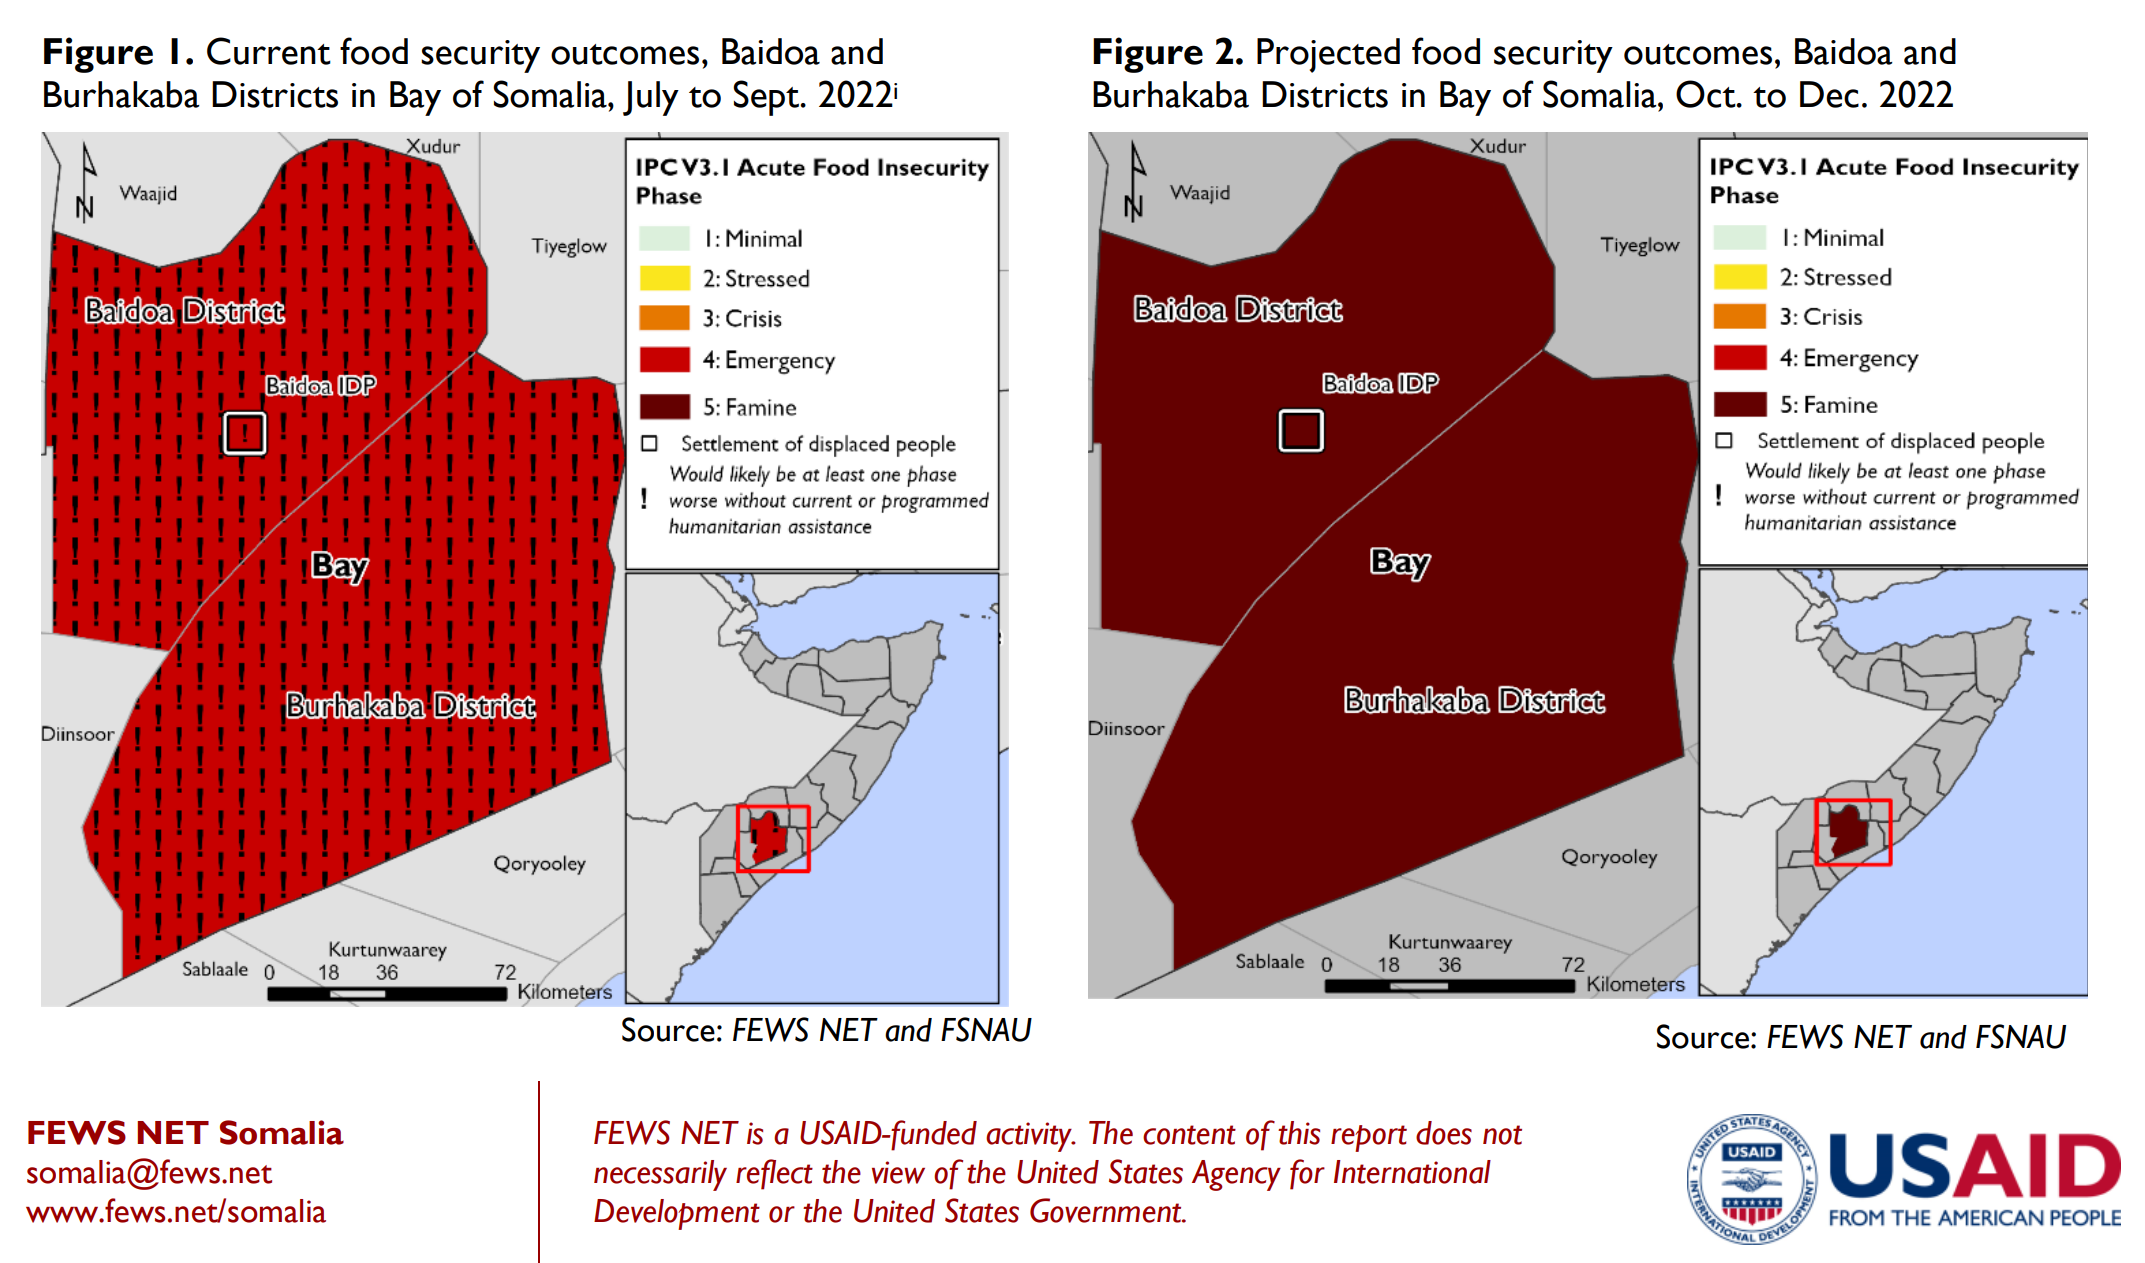 Current food security outcomes, Baidoa and Burhakaba Districts in Bay of Somalia, July to September 2022 (left) and projected food security outcomes, Baidoa and Burhakaba Districts in Bay of Somalia, October to December 2022 (right). Famine (IPC Phase 5) is projected to emerge in three areas of Bay Region, Somalia, in late 2022 in the absence of urgent, multisectoral humanitarian assistance. Although levels of acute malnutrition among children and the rate of hunger-related deaths have not yet met the IPC’s technical definition of Famine (IPC Phase 5), those thresholds are expected to be reached during the October to December 2022 projection period based on currently available information that minimal humanitarian food assistance will be delivered in these areas in November and December due to funding constraints. Data: FEWS NET and FSNAU. Graphic: FEWS NET Somalia